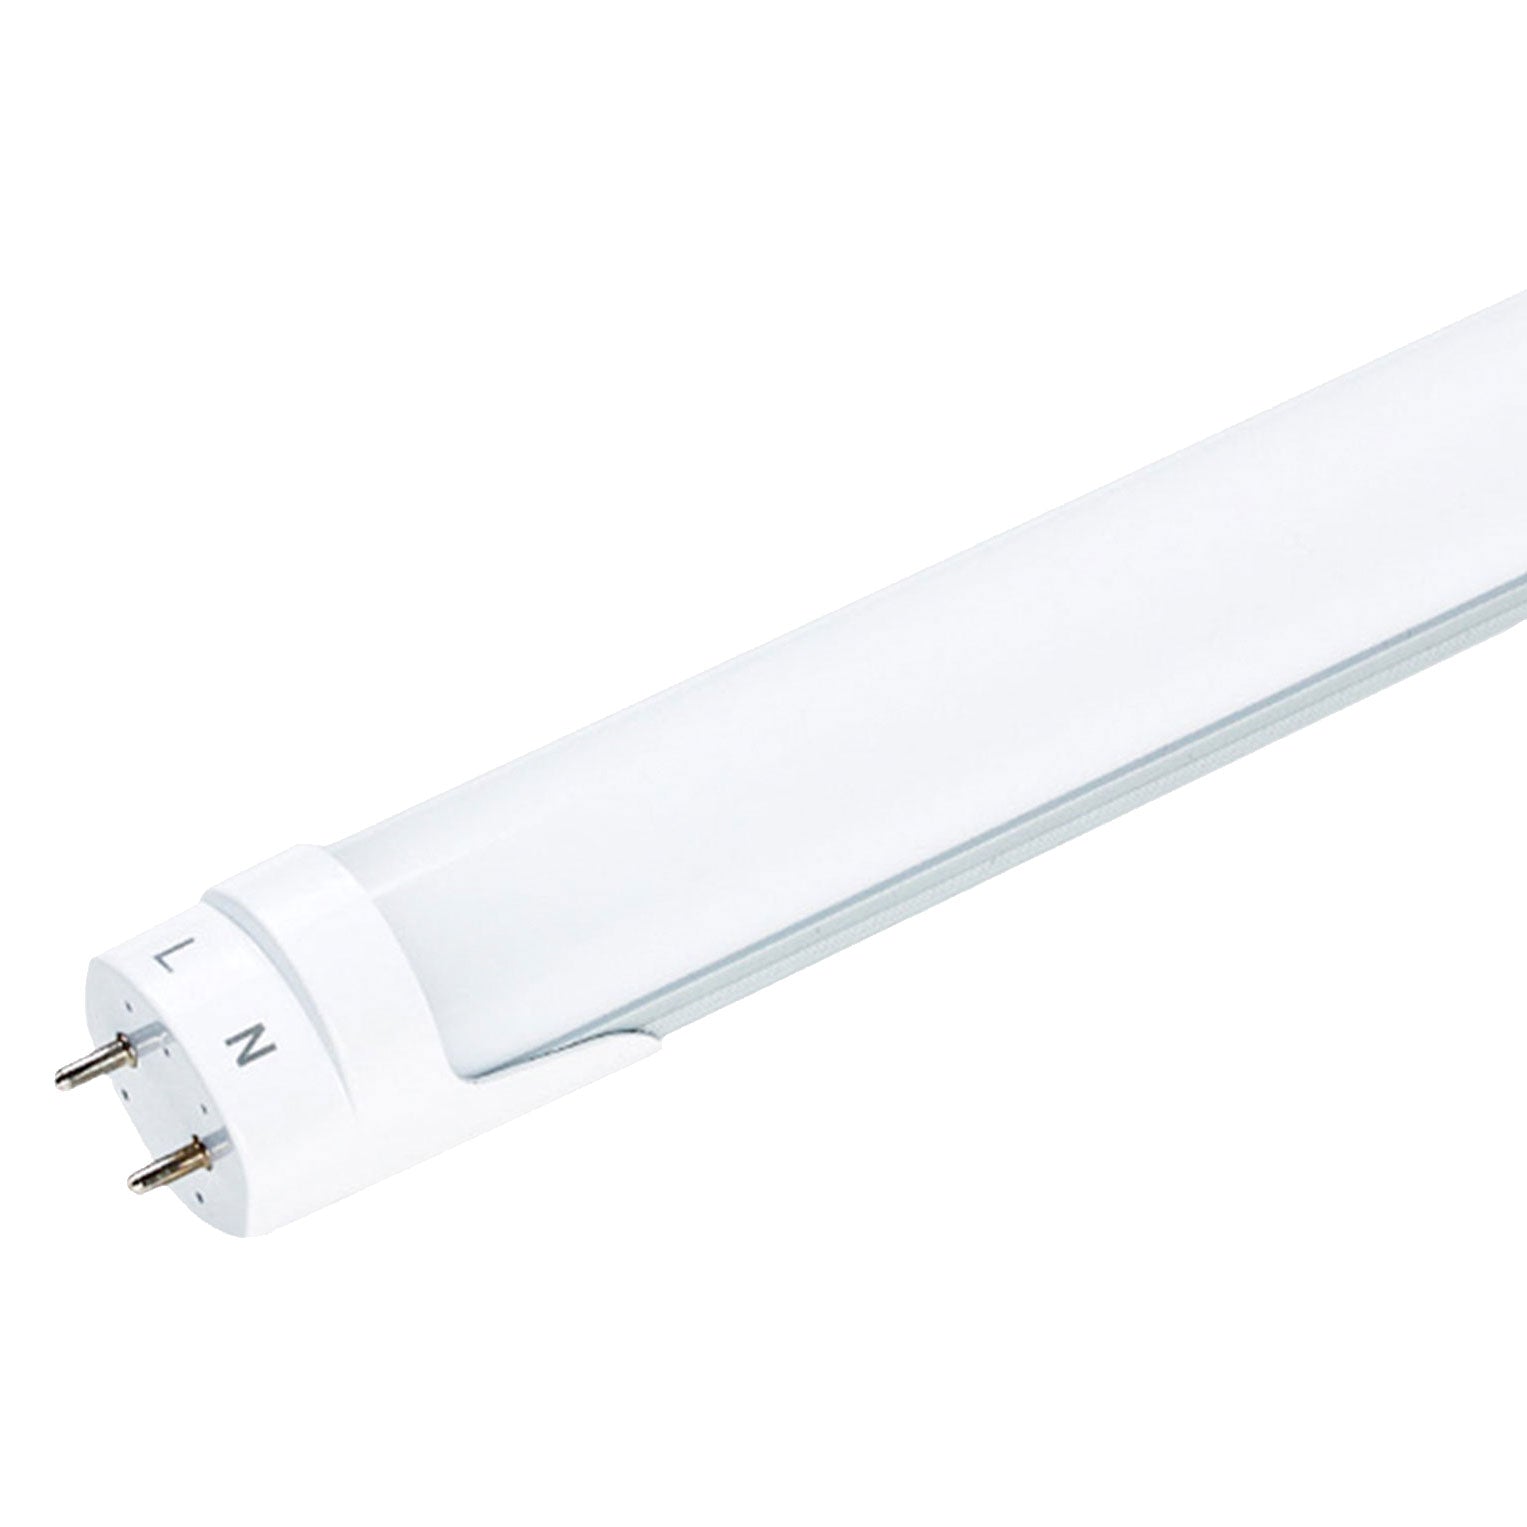 LED Tubes – The Ultimate Guide to Replacing Fluorescent Tubes